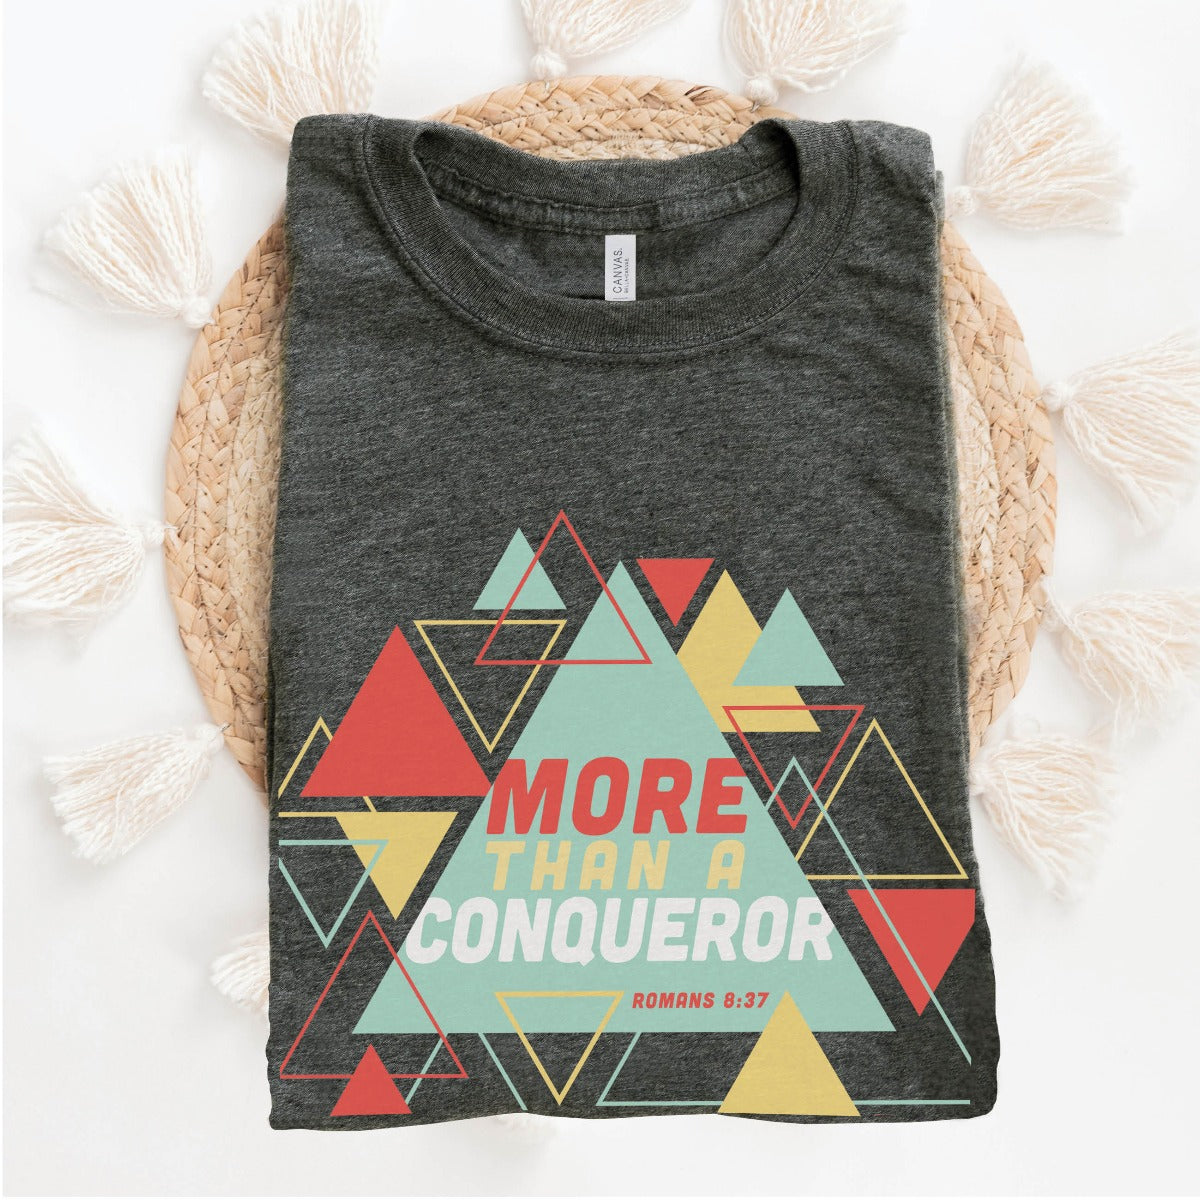 Heather Dark Gray "More Than A Conqueror" Romans 8:37 bible verse scripture unisex faith-based Christian Bella Canvas 3001 t-shirt, with bright and colorful geometric triangles pattern, made in the USA for Men and Women Jesus believers